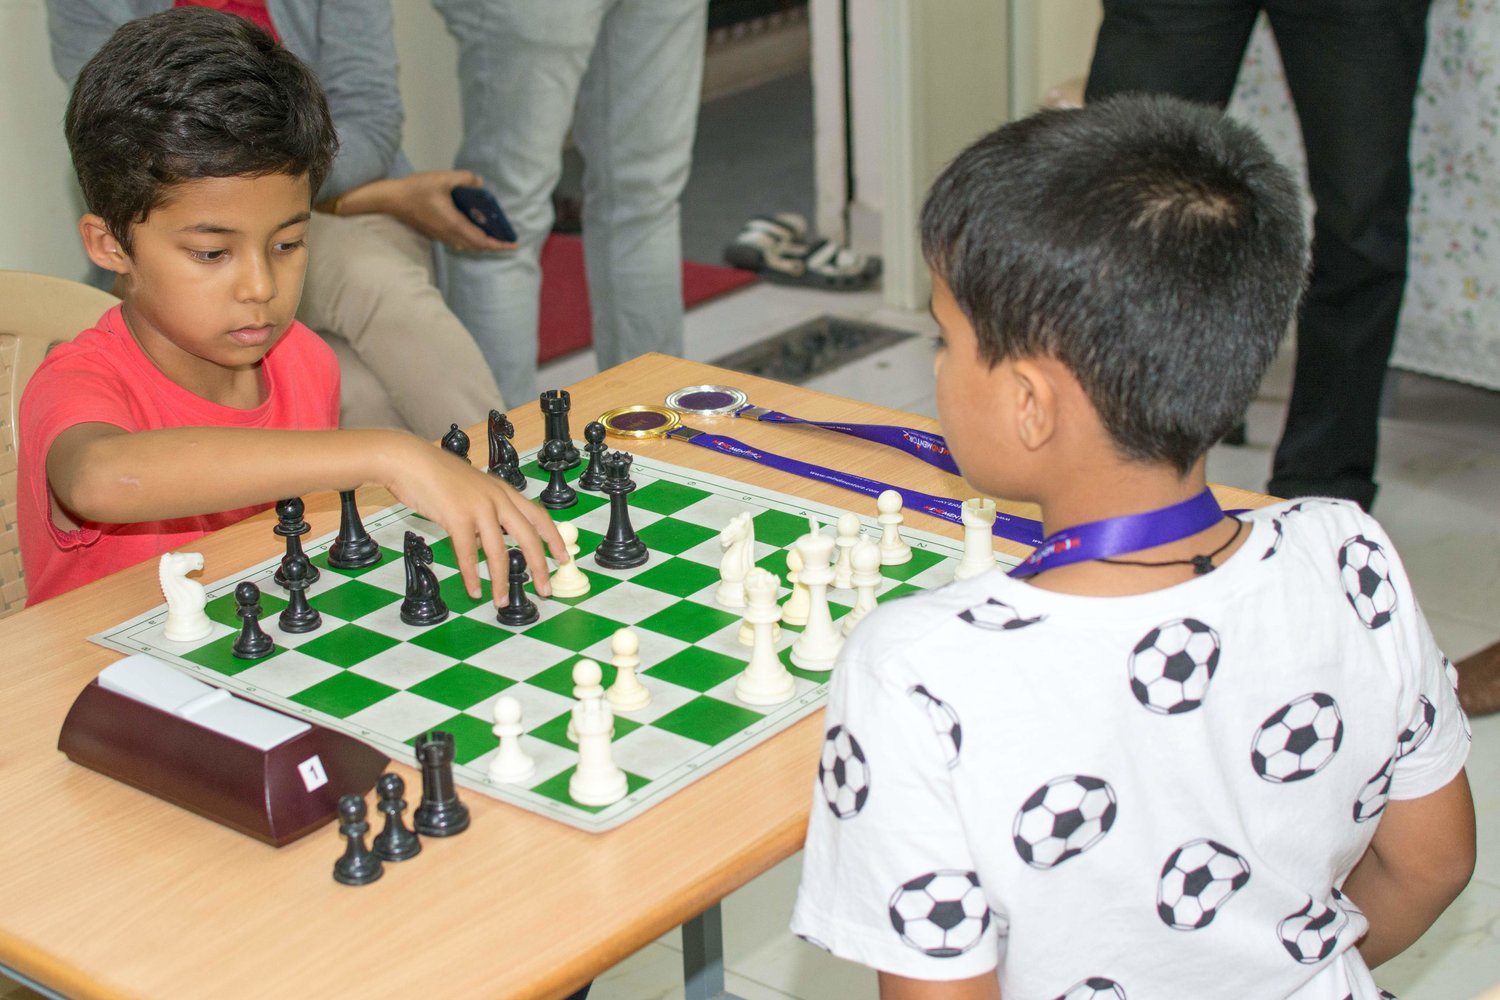 Master chess and highest level with MindMentorz Chess coaching classes In Bangalore